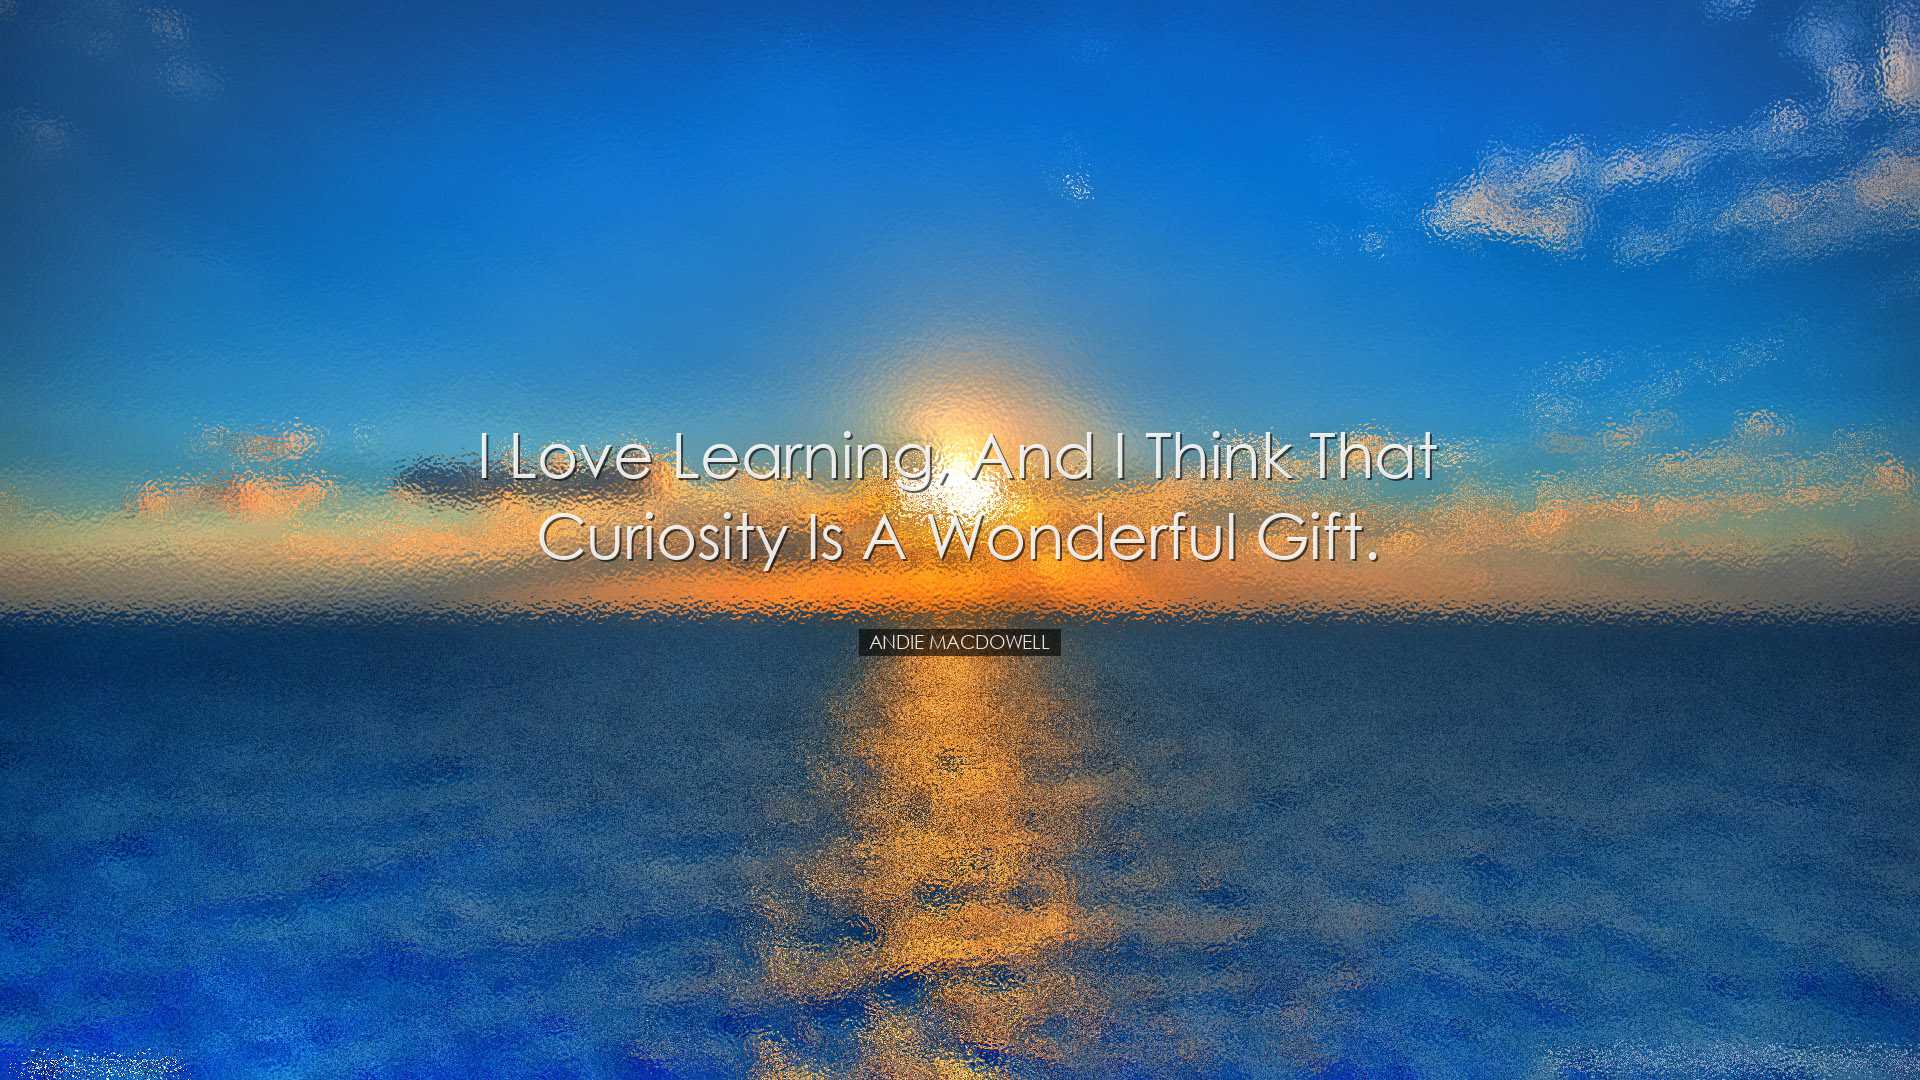 I love learning, and I think that curiosity is a wonderful gift. -